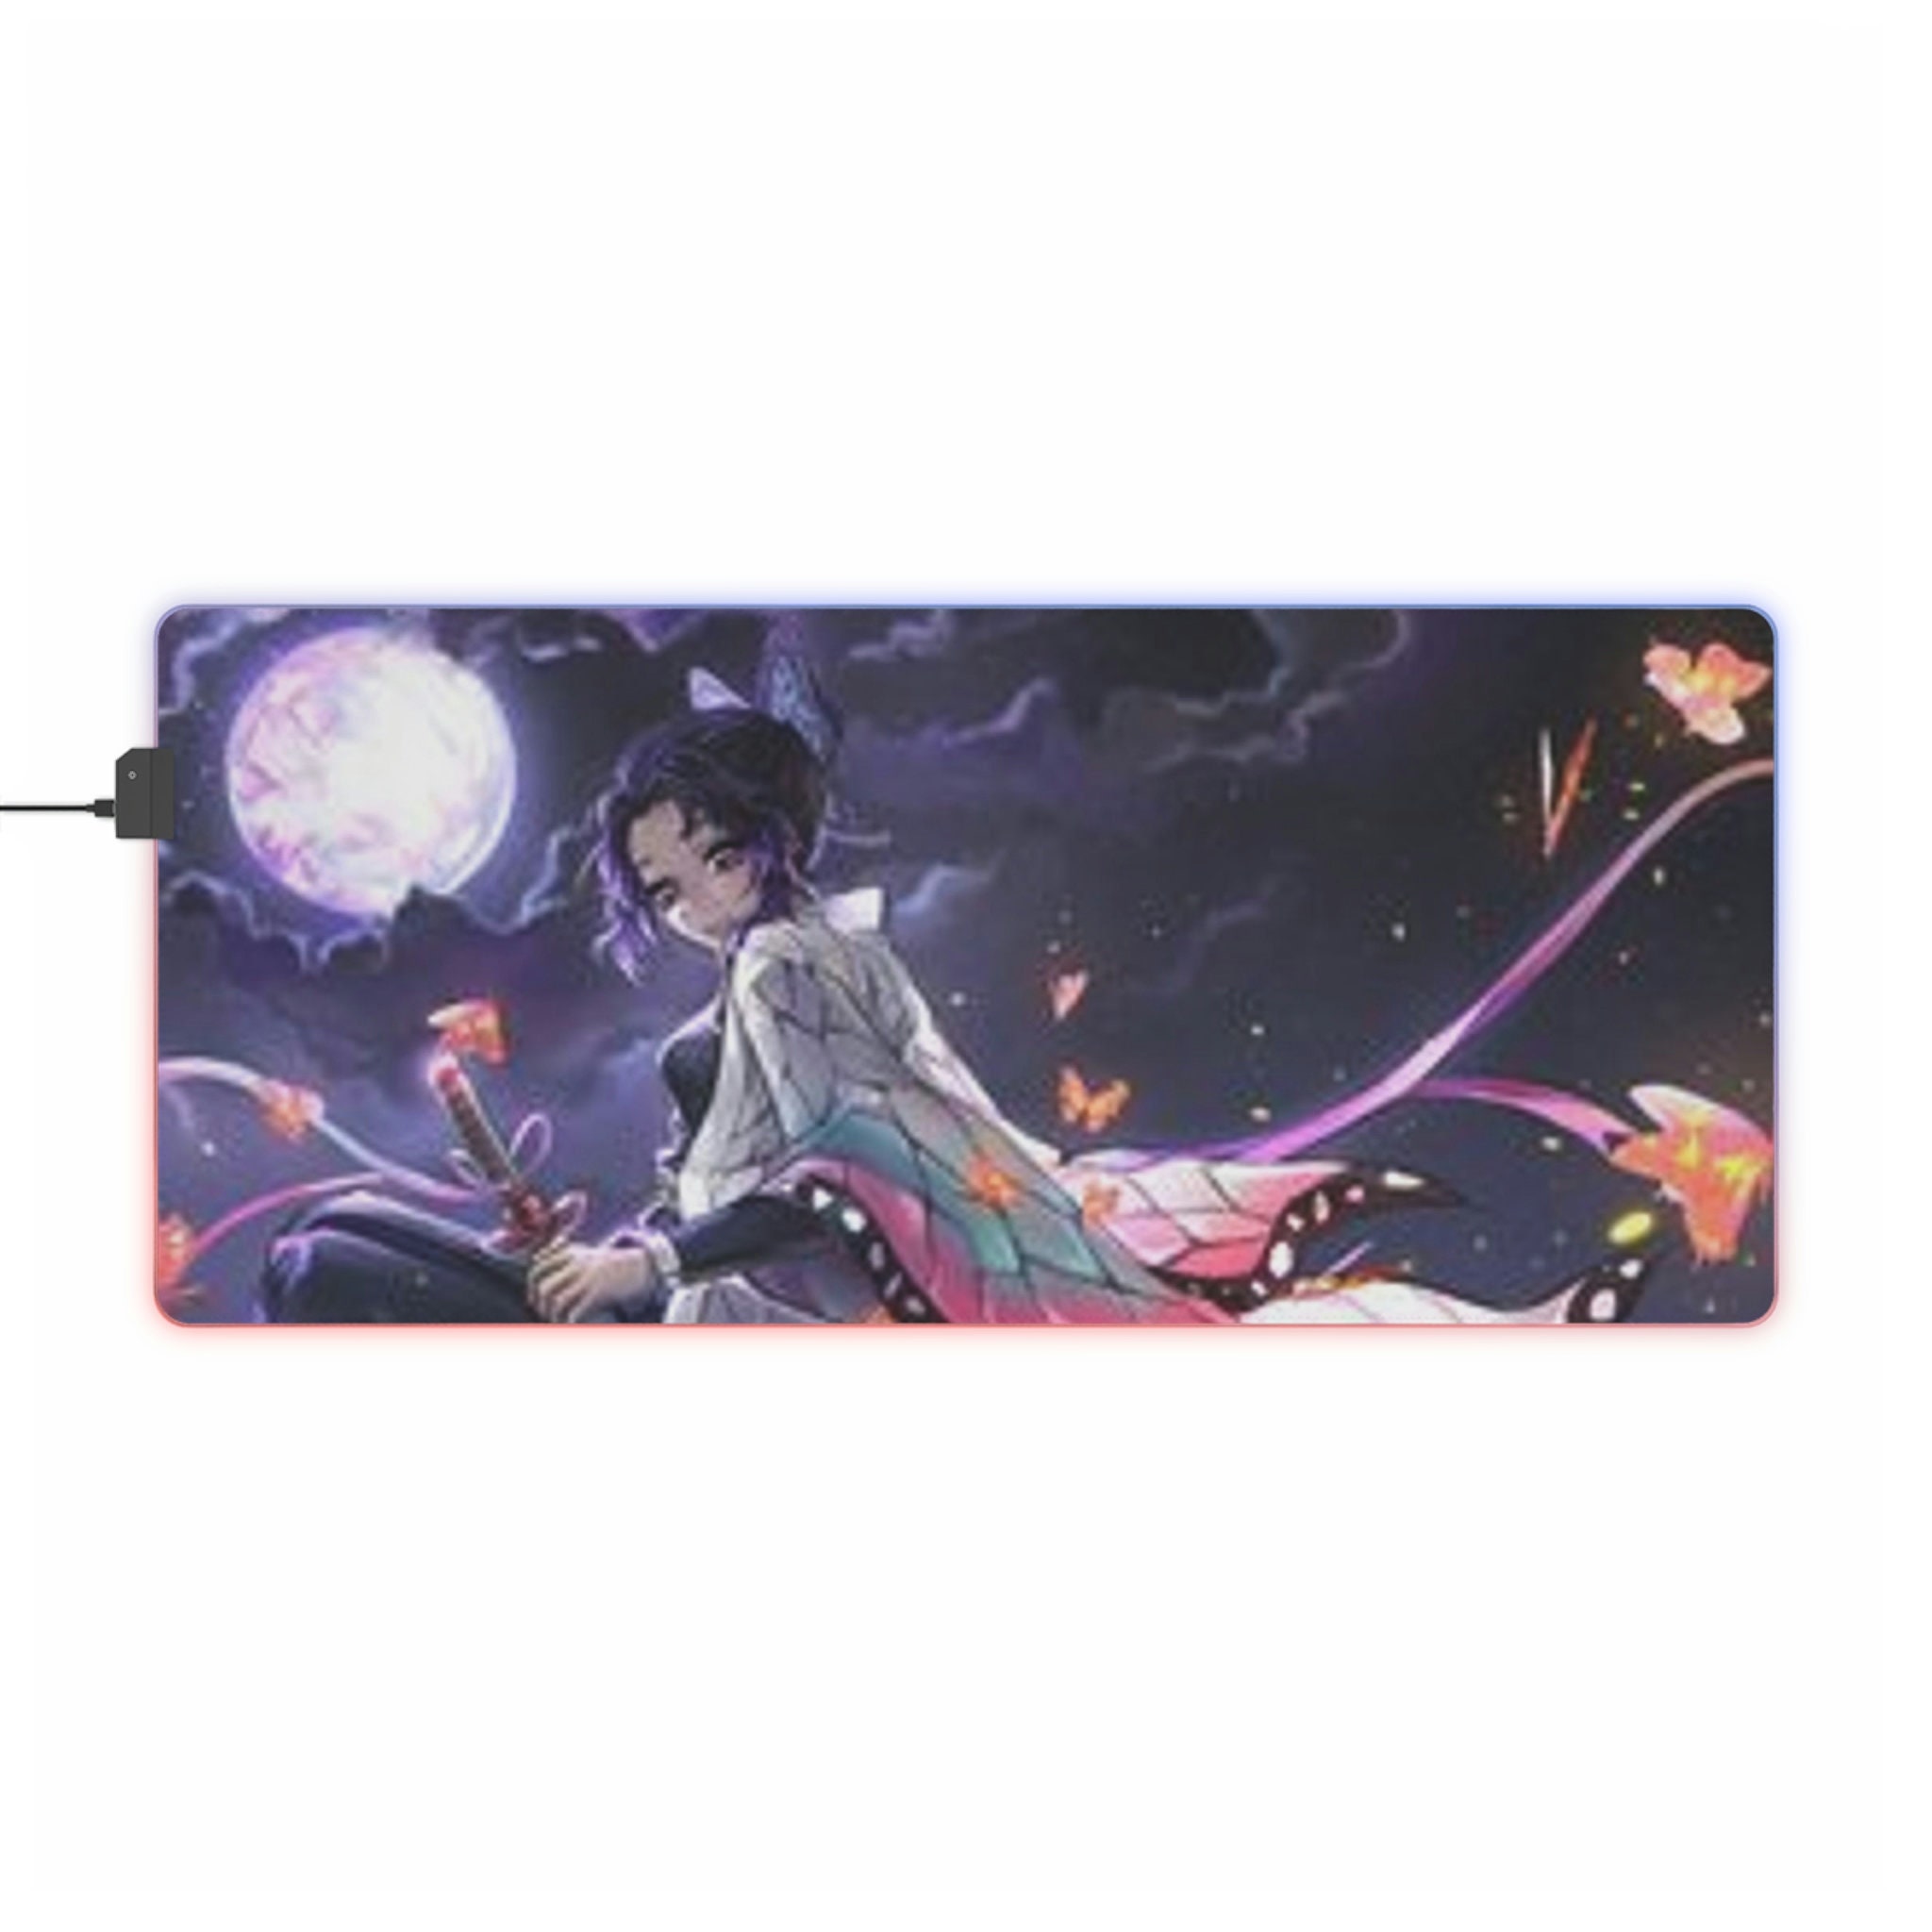 Rgb gaming mouse pad anime todoroki custom design mousepadmouse pads with  nonslip rubber basestitched edges mouse matwashable desk pad for  computer keyboard mice laptop  pc315x118 inch price in Egypt  Amazon